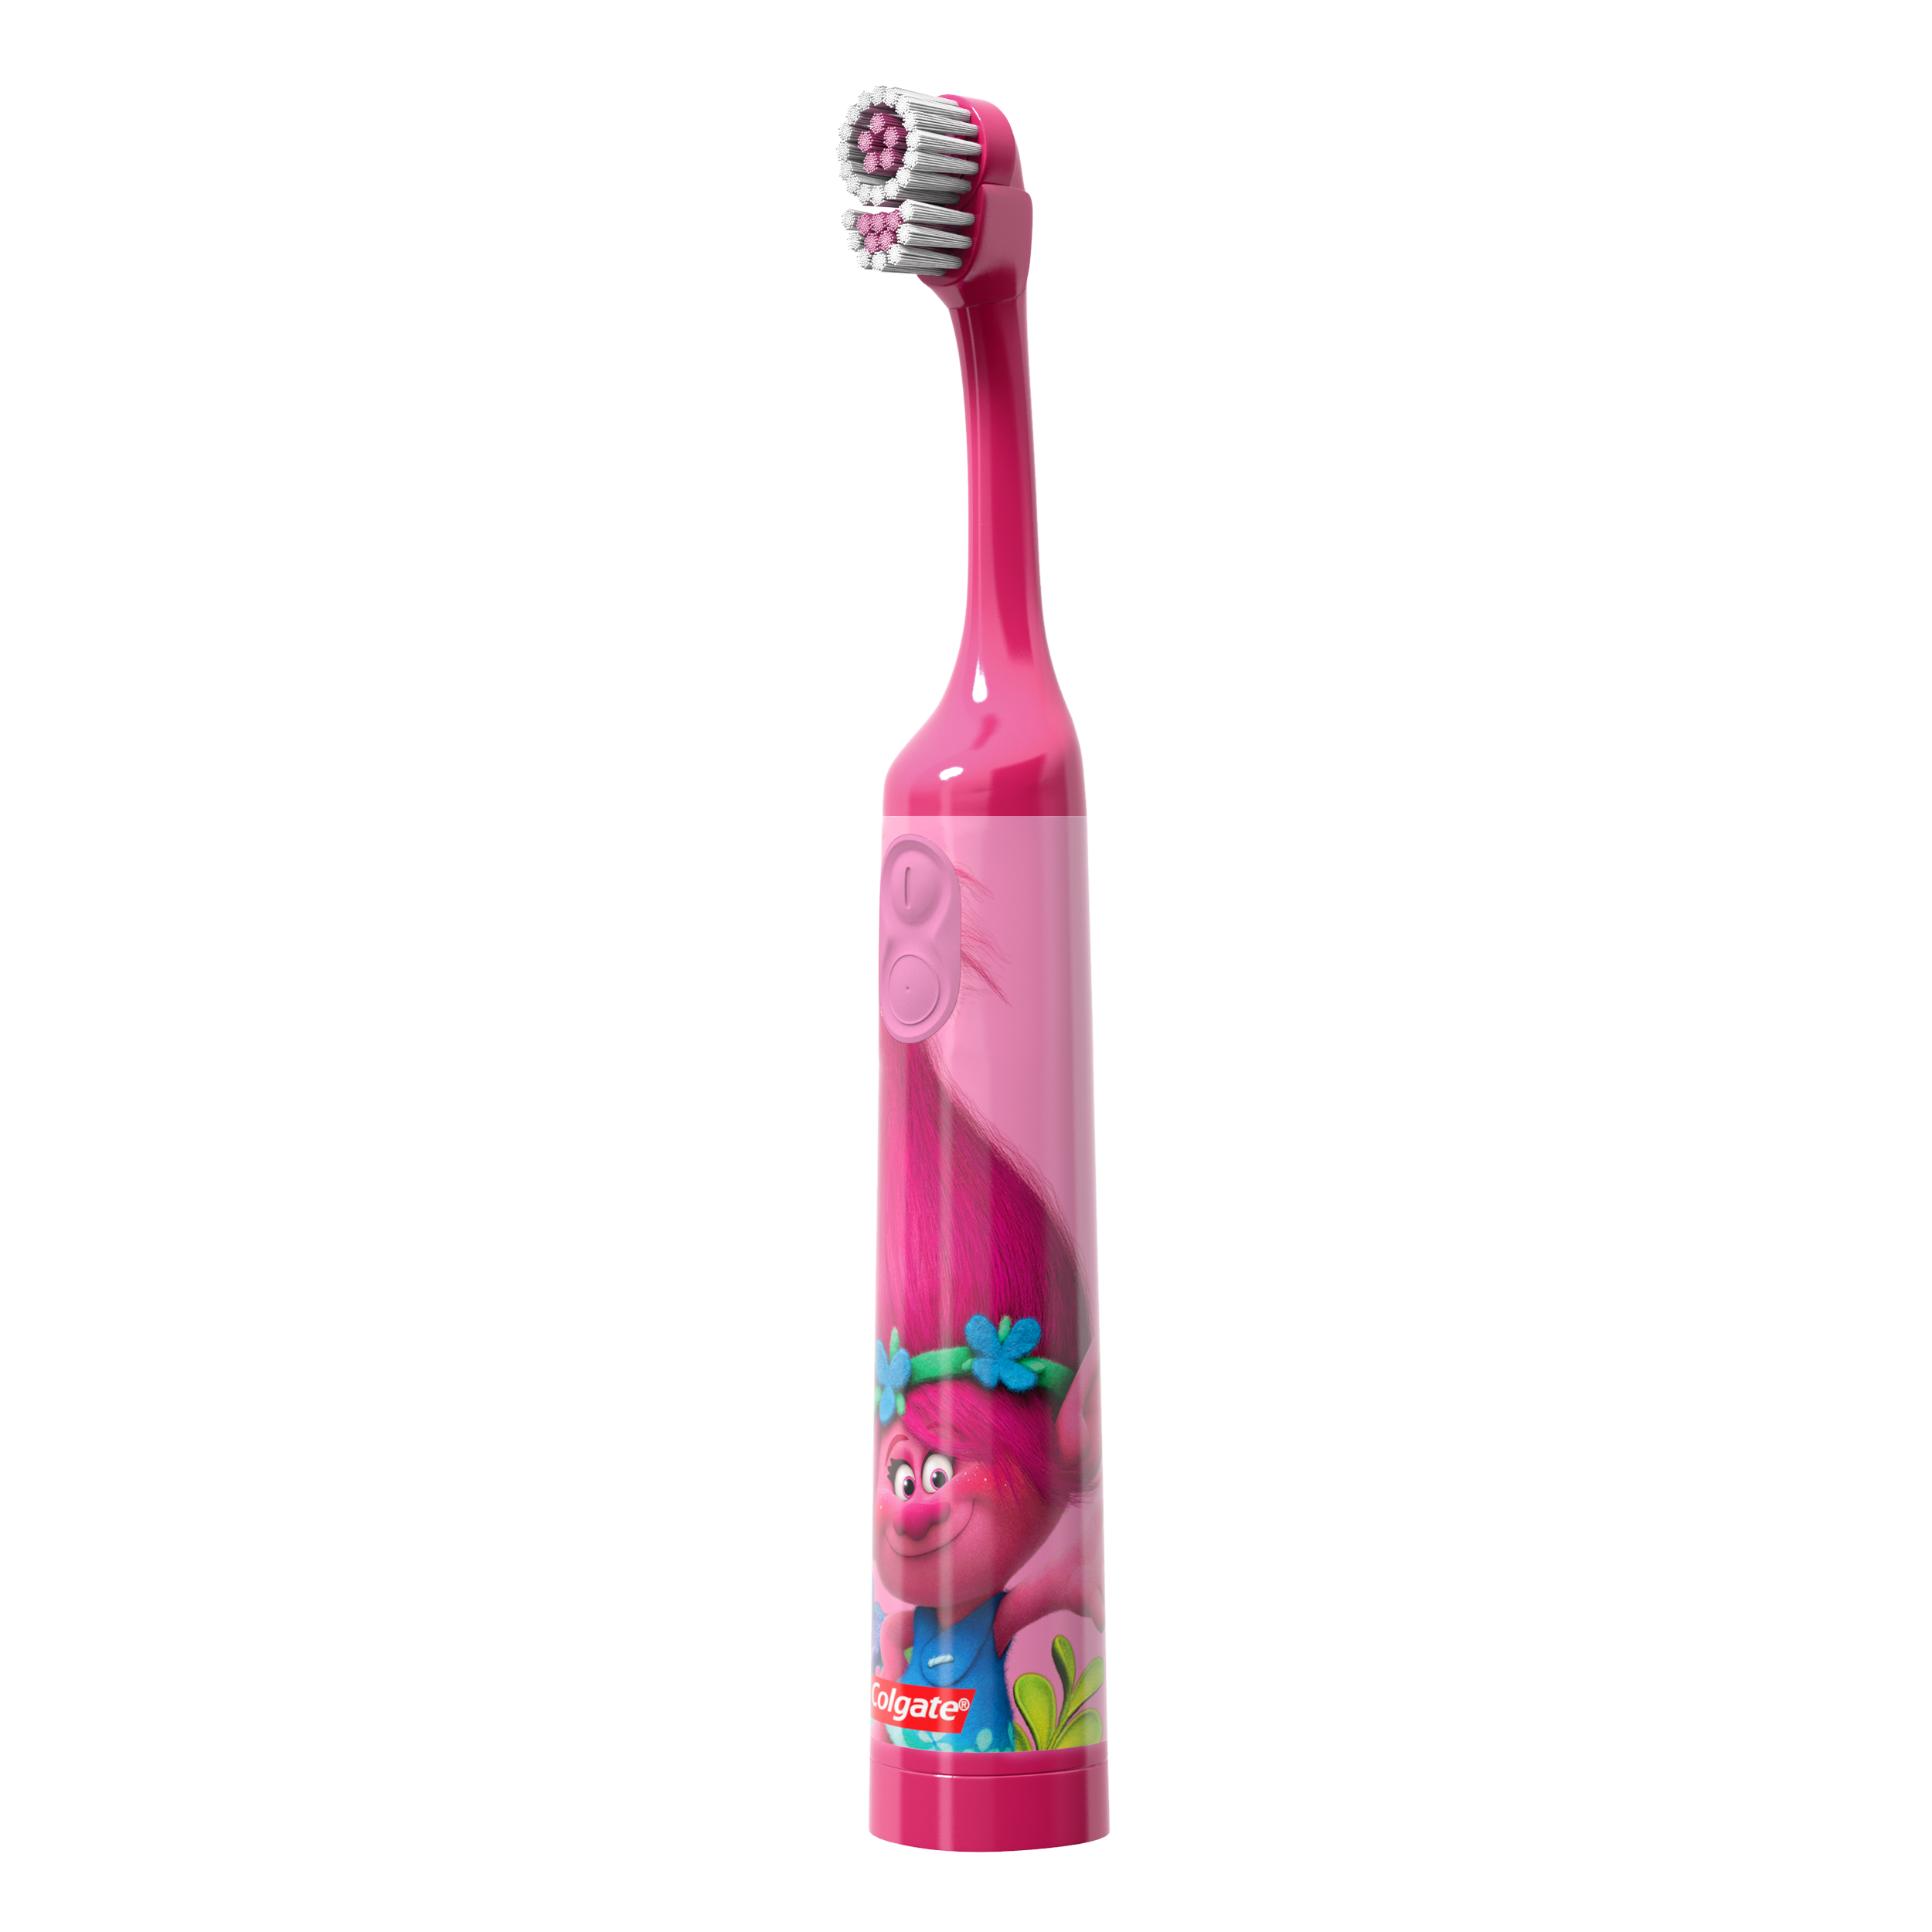 Colgate Kids Spinning Battery Powered Toothbrush, Trolls, Extra Soft, 1 Ct - image 2 of 2